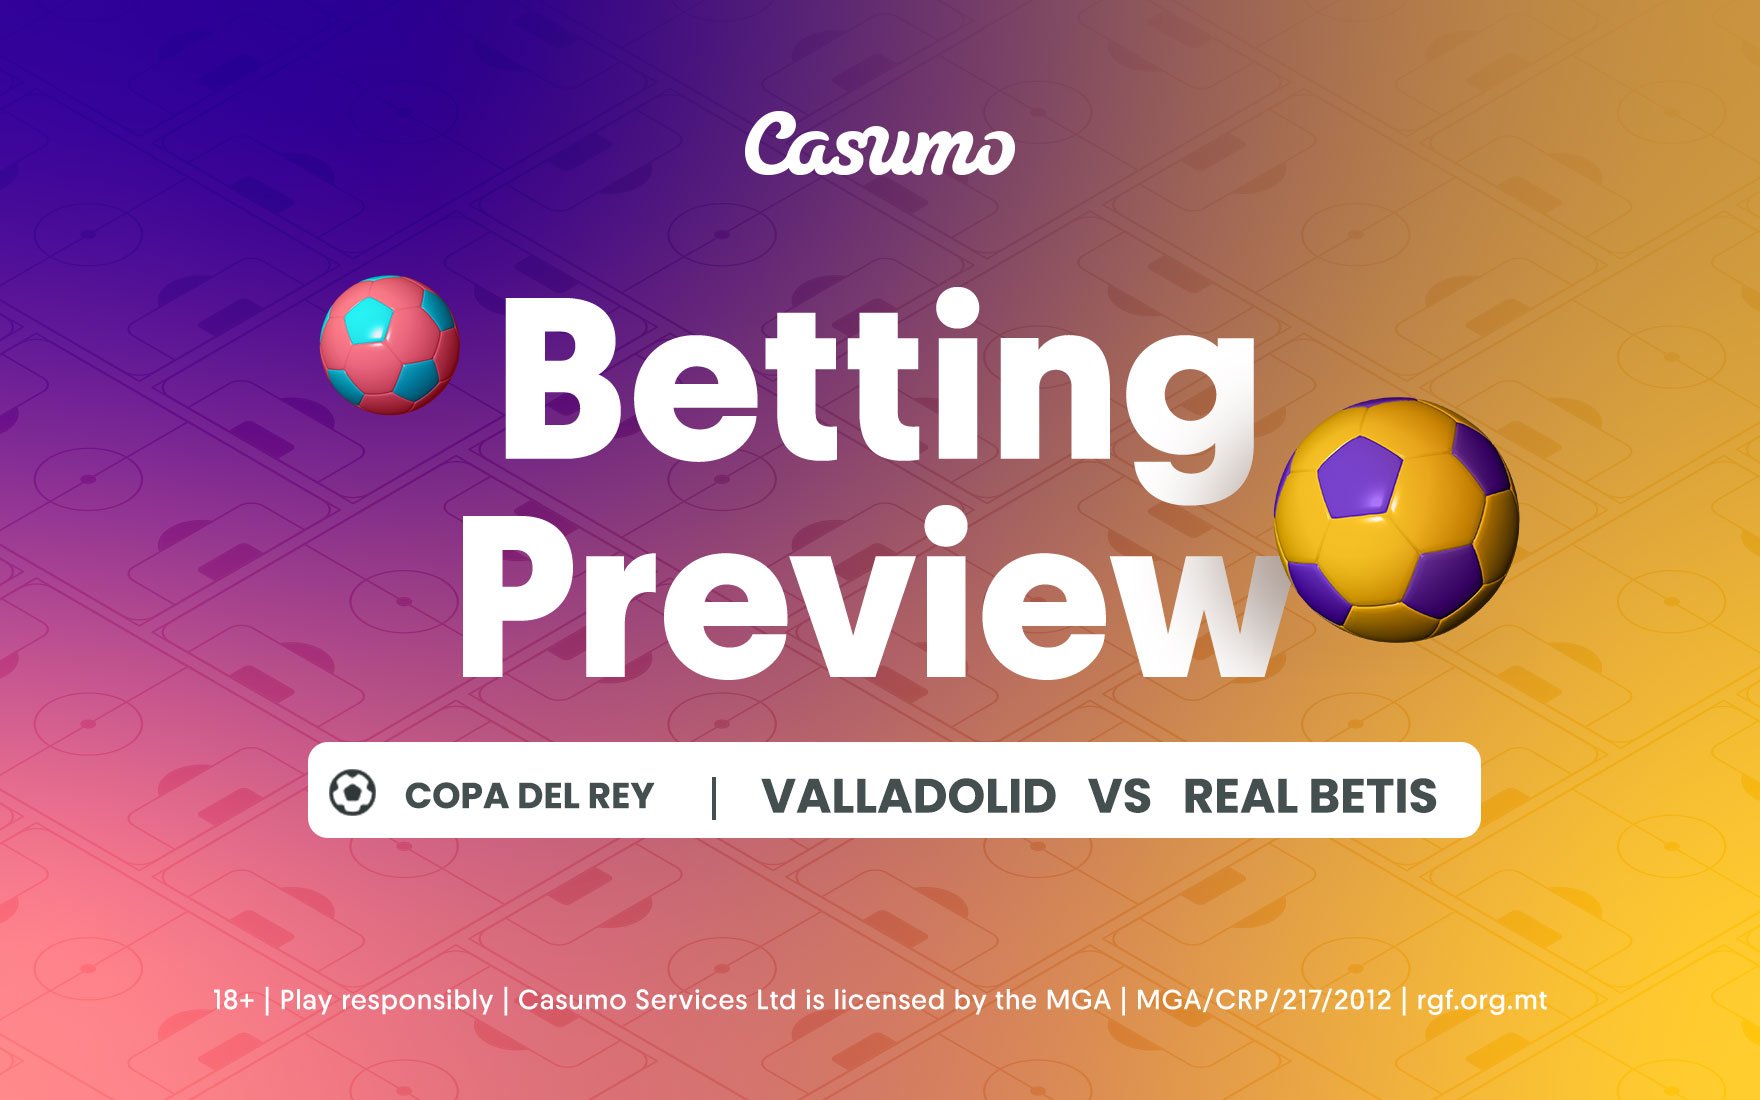 Valladolid vs Real Betis betting tips